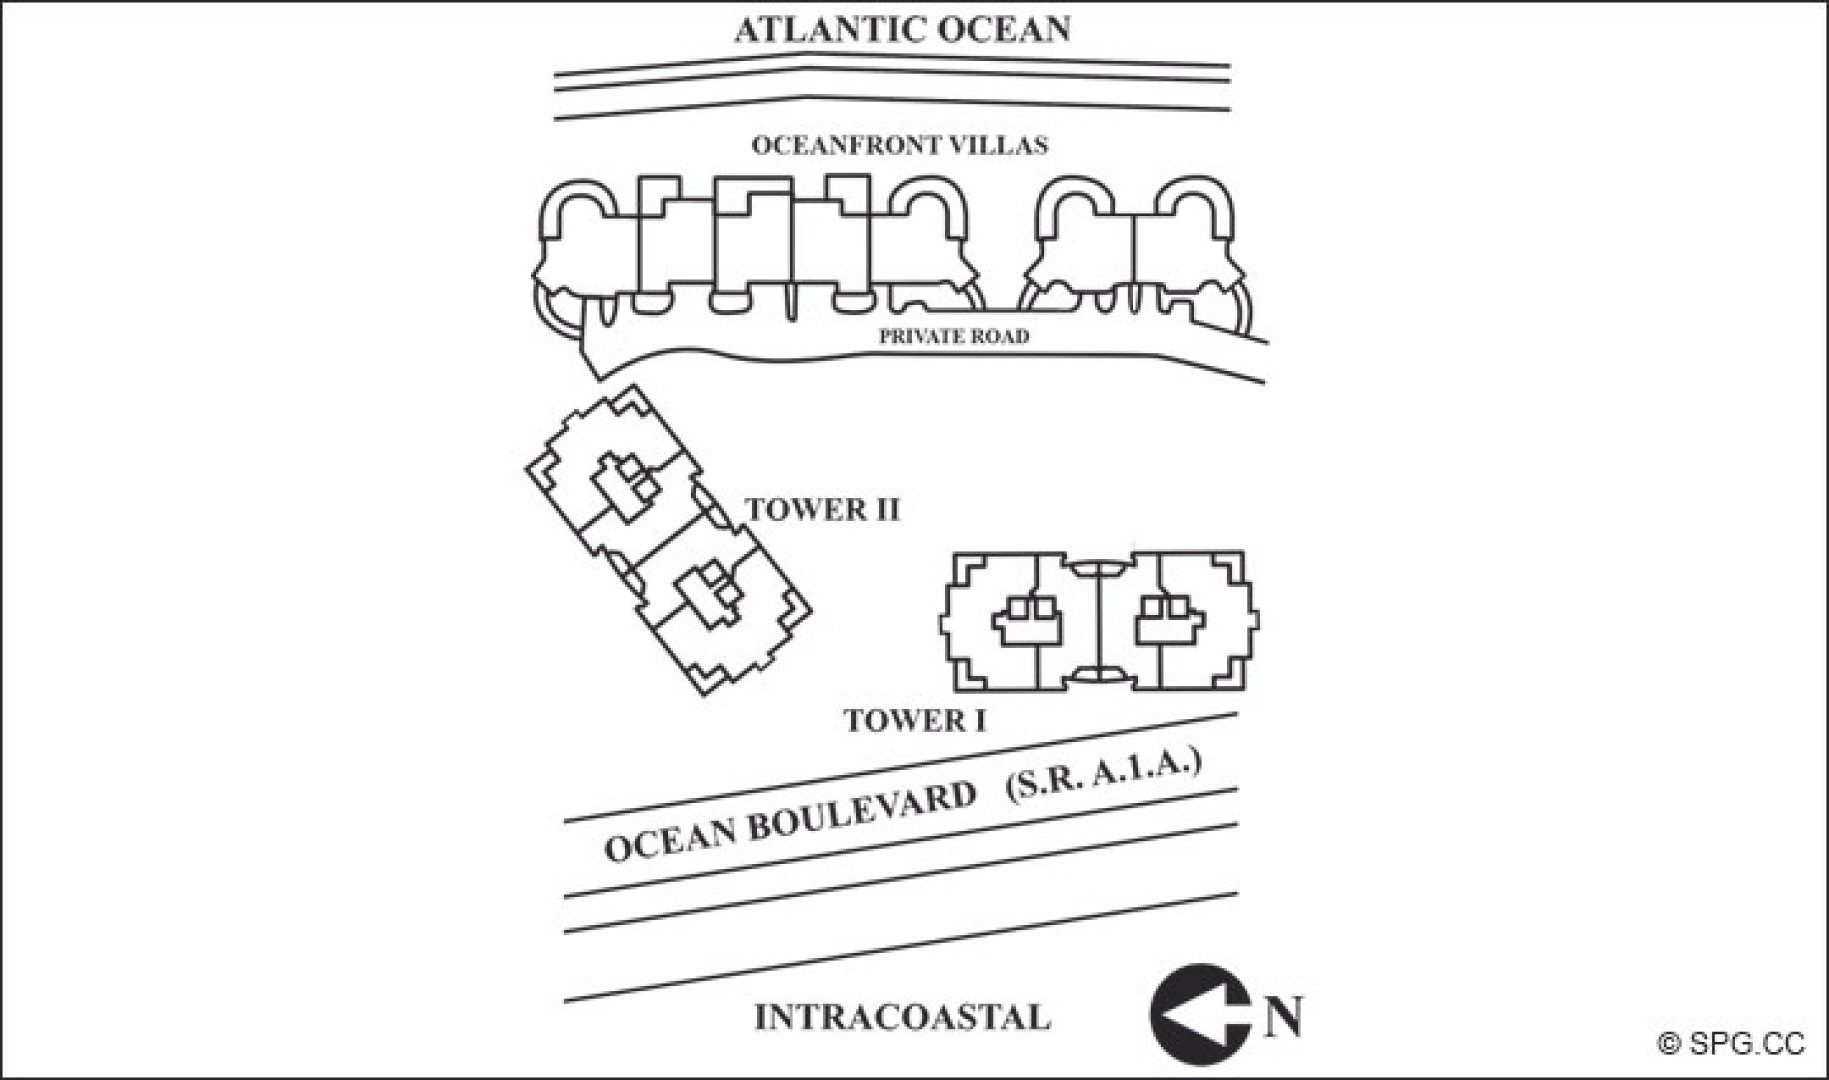 Siteplan for The Palms, Luxury Oceanfront Condos in Ft Lauderdale